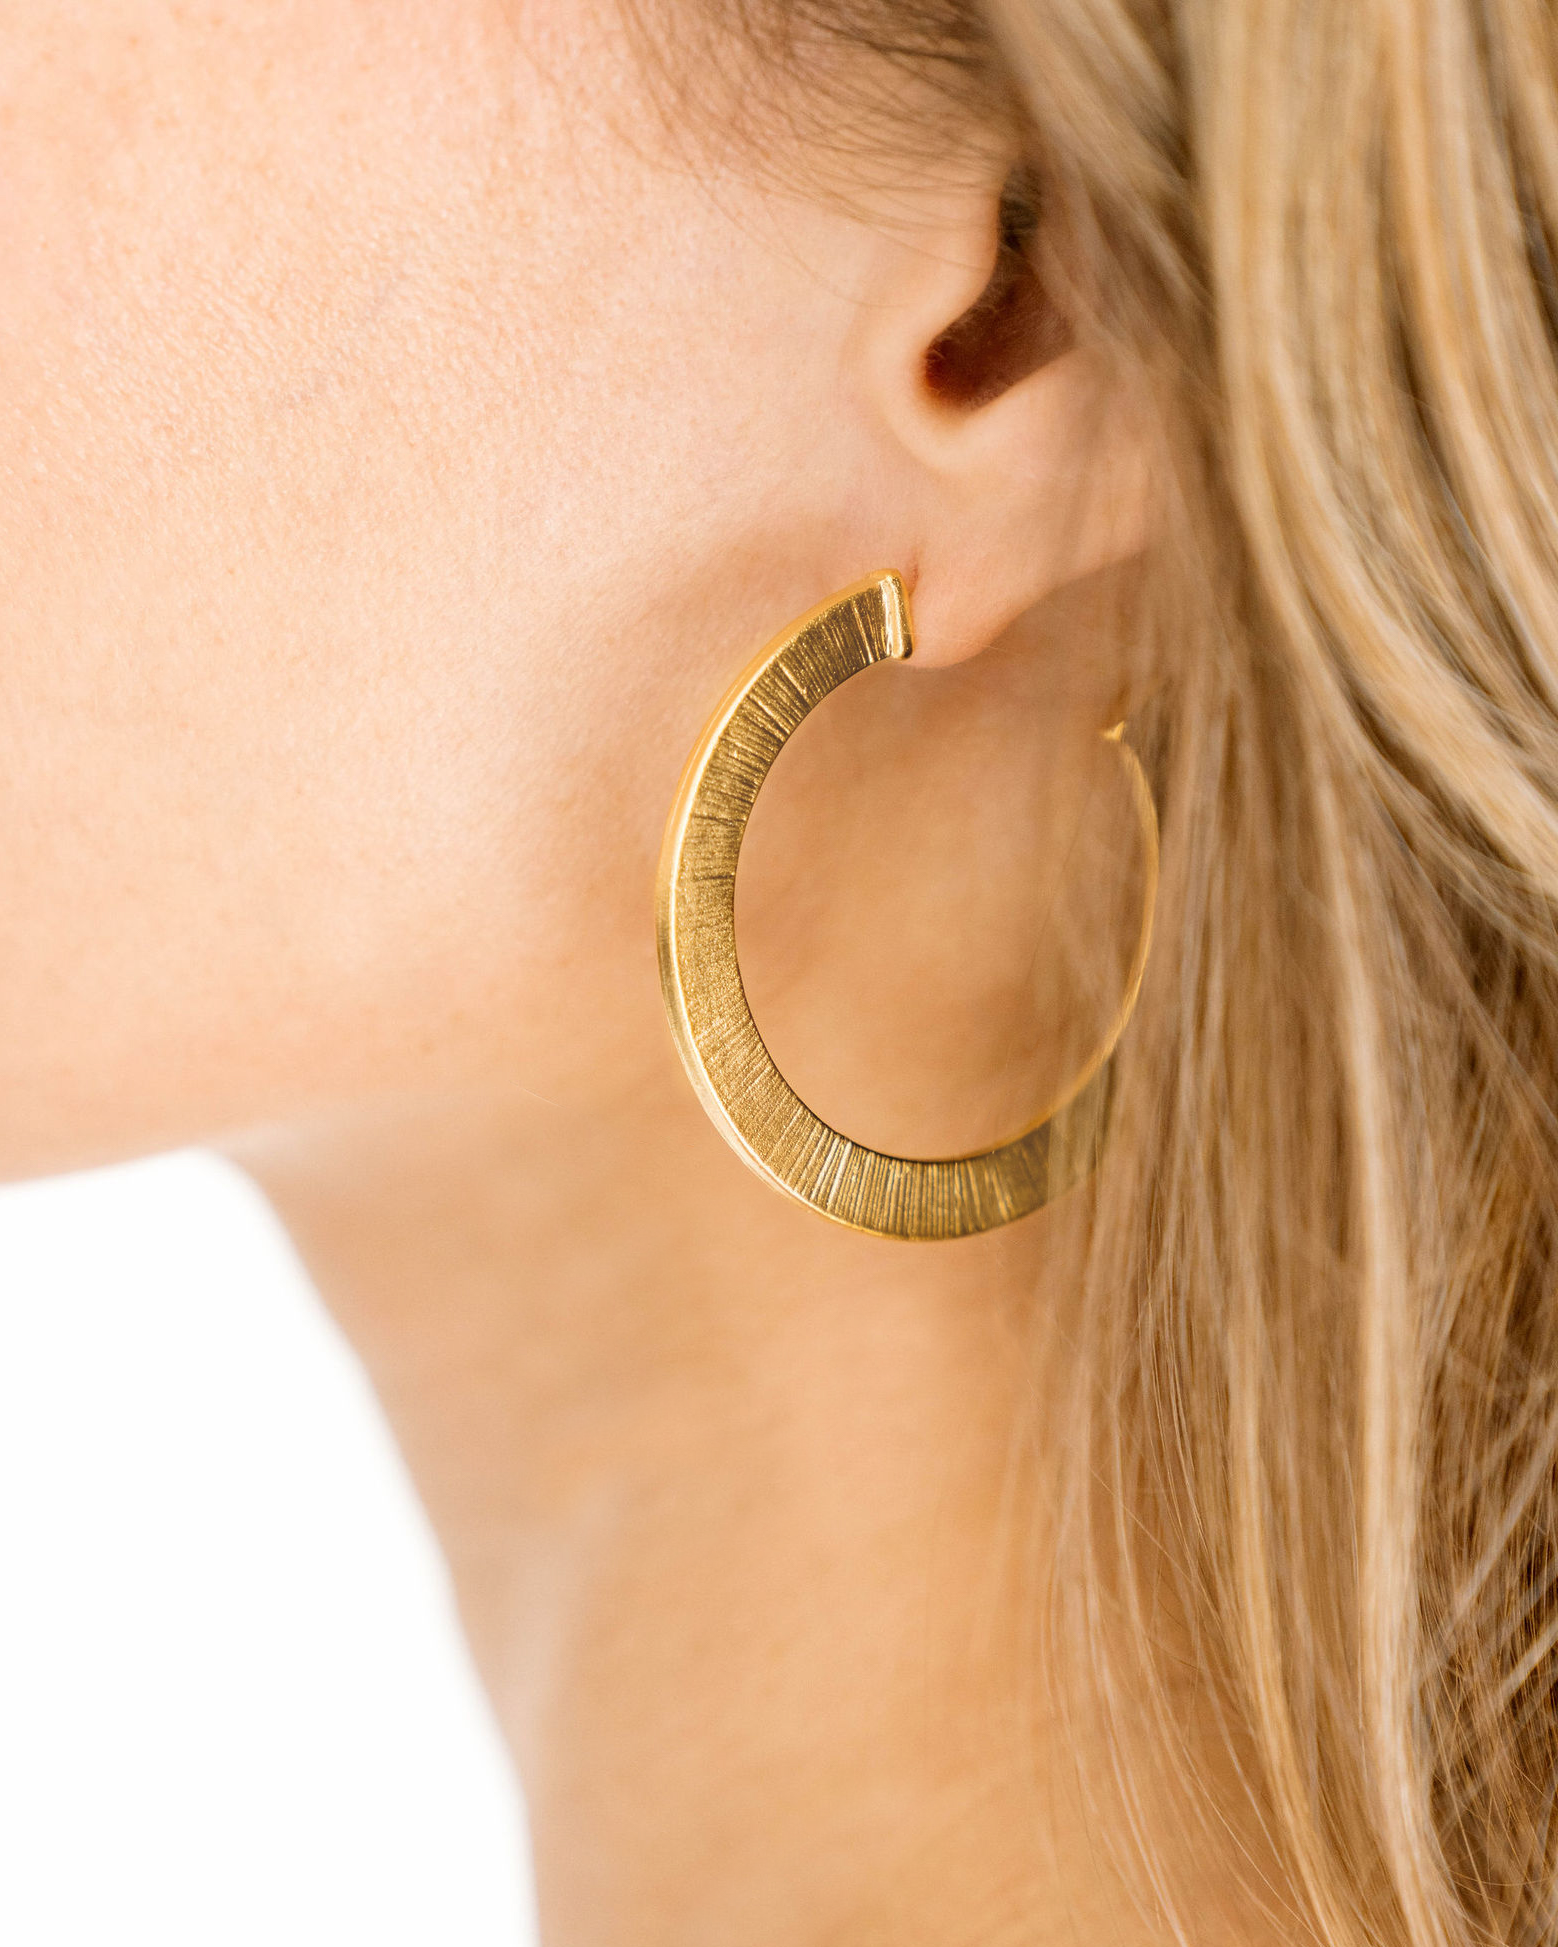 TEXTURED CLASSIC HOOPS